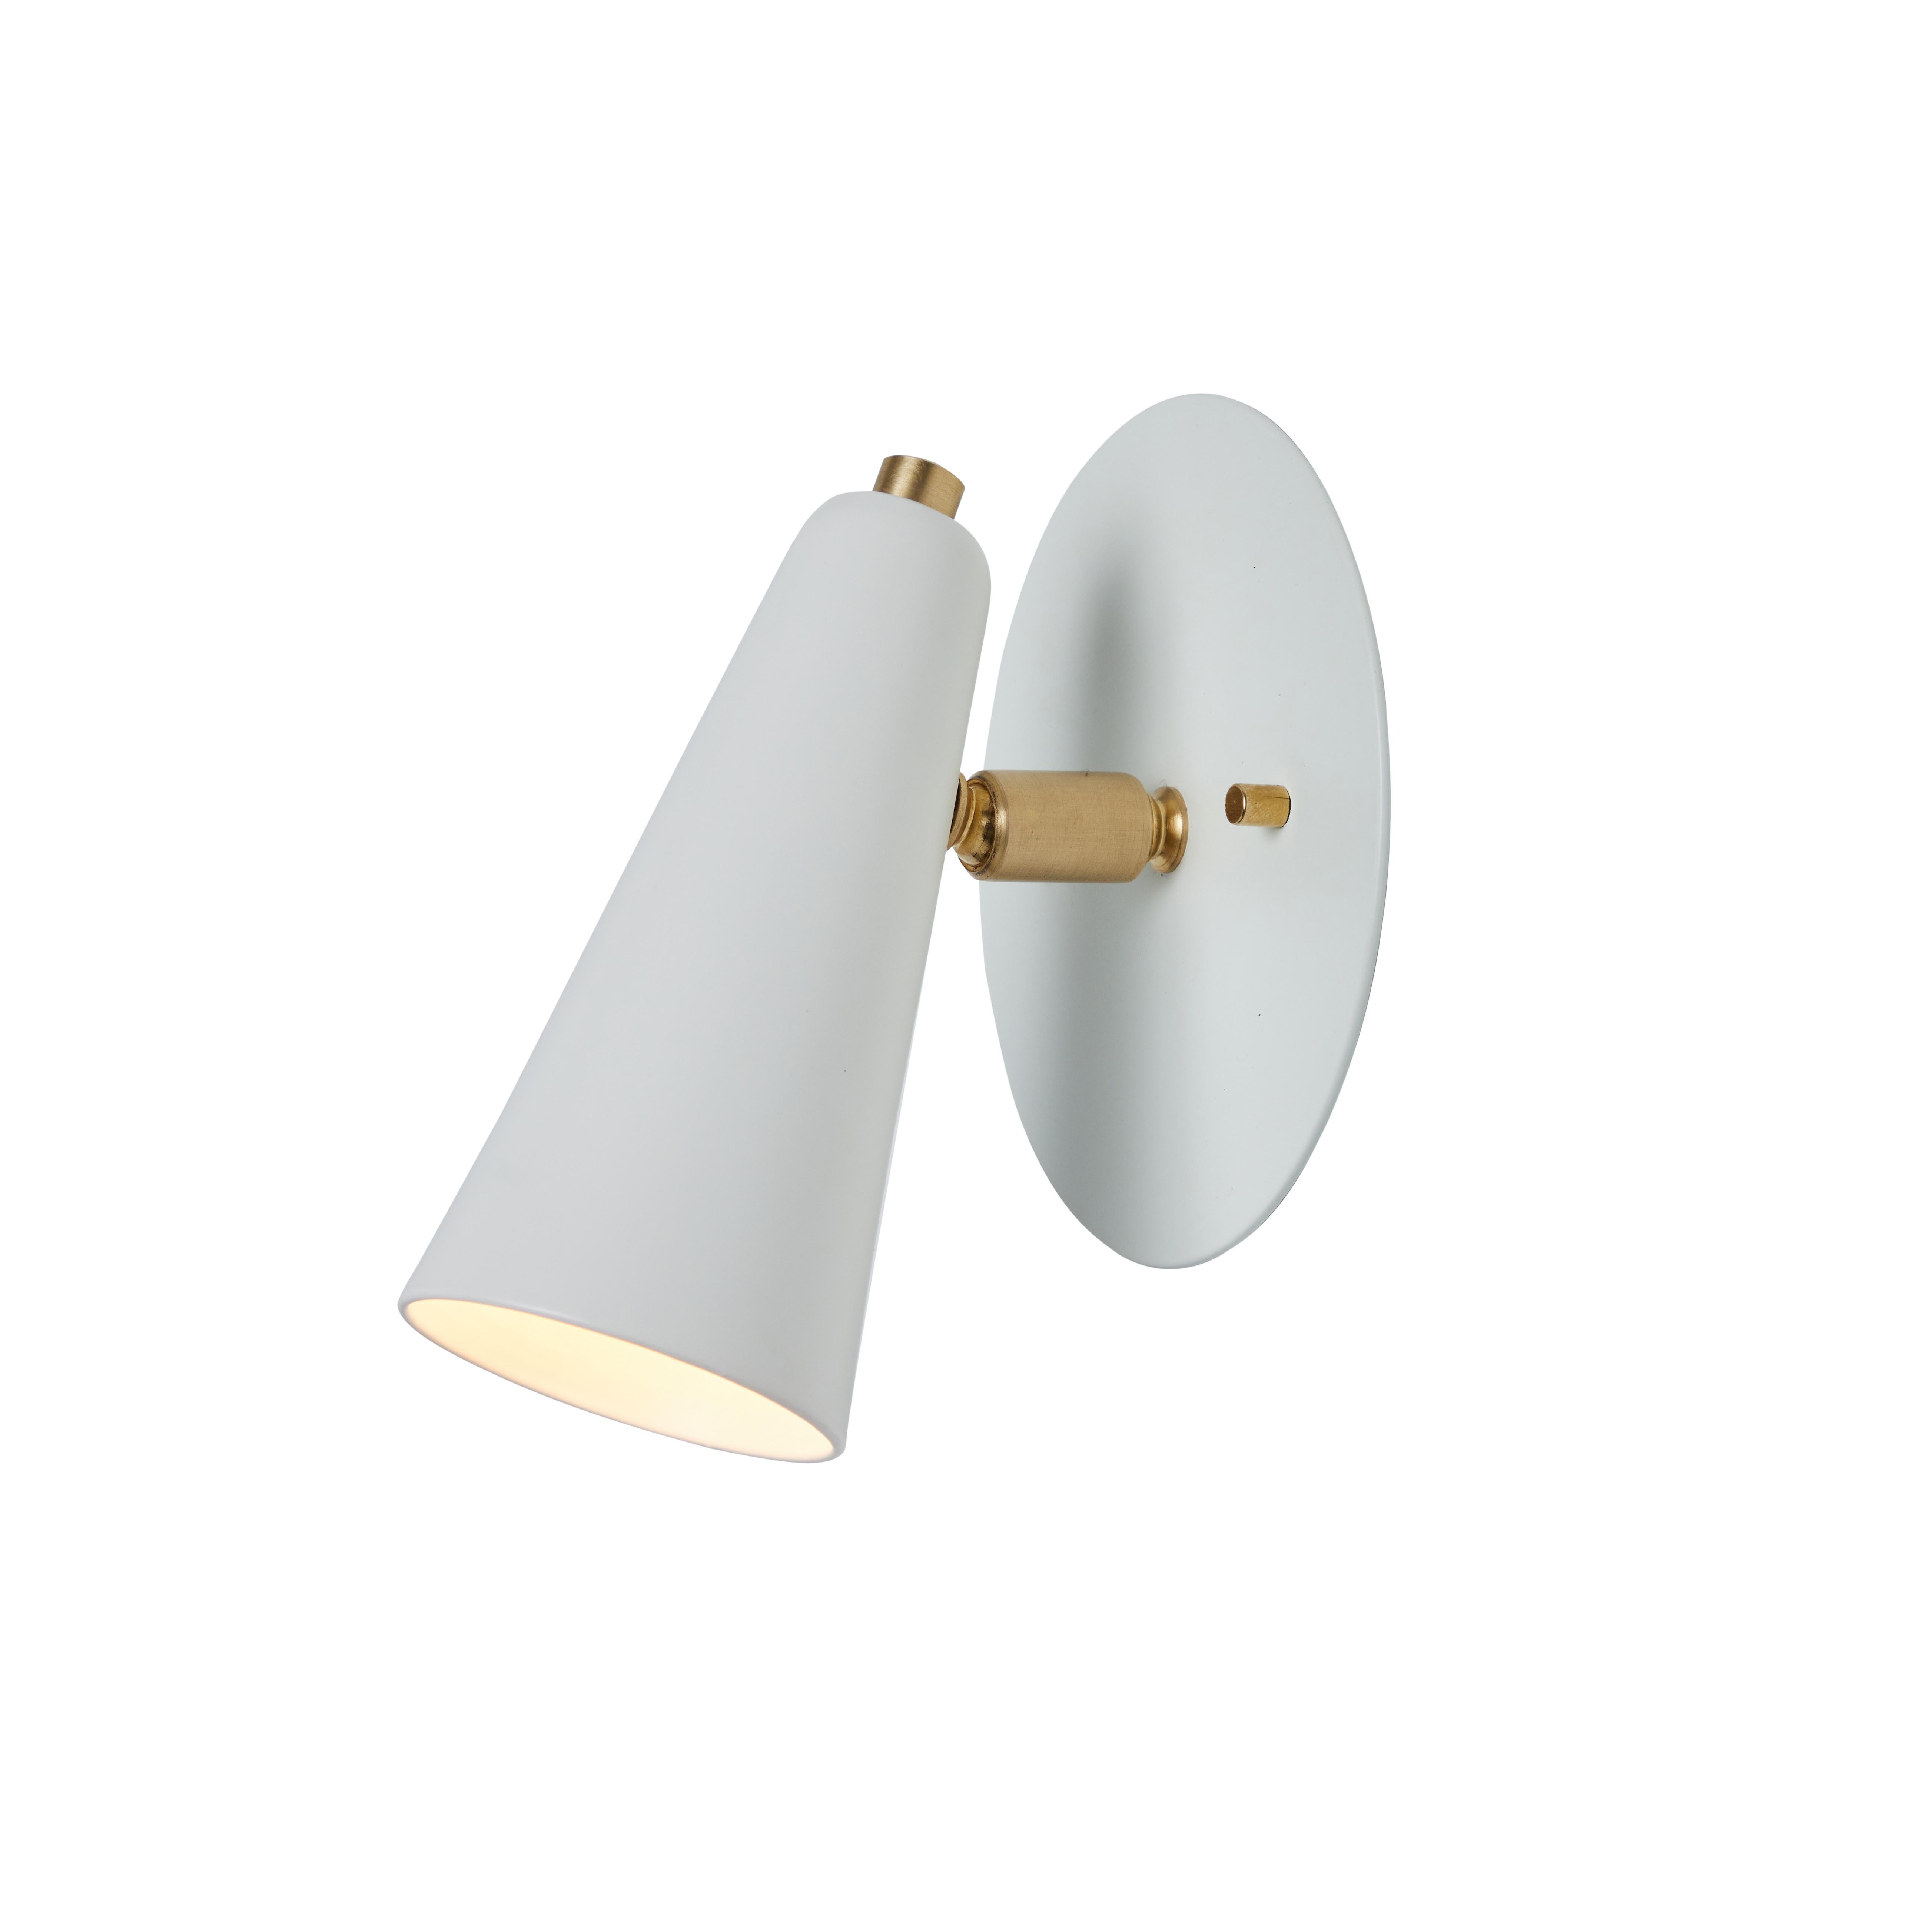 Pair of 'Lupita' sconces in white and brass by Alvaro Benitez. 

Hand-fabricated by Los Angeles based designer and lighting professional Alvaro Benitez, these highly refined and highly adjustable sconces are reminiscent of the iconic midcentury